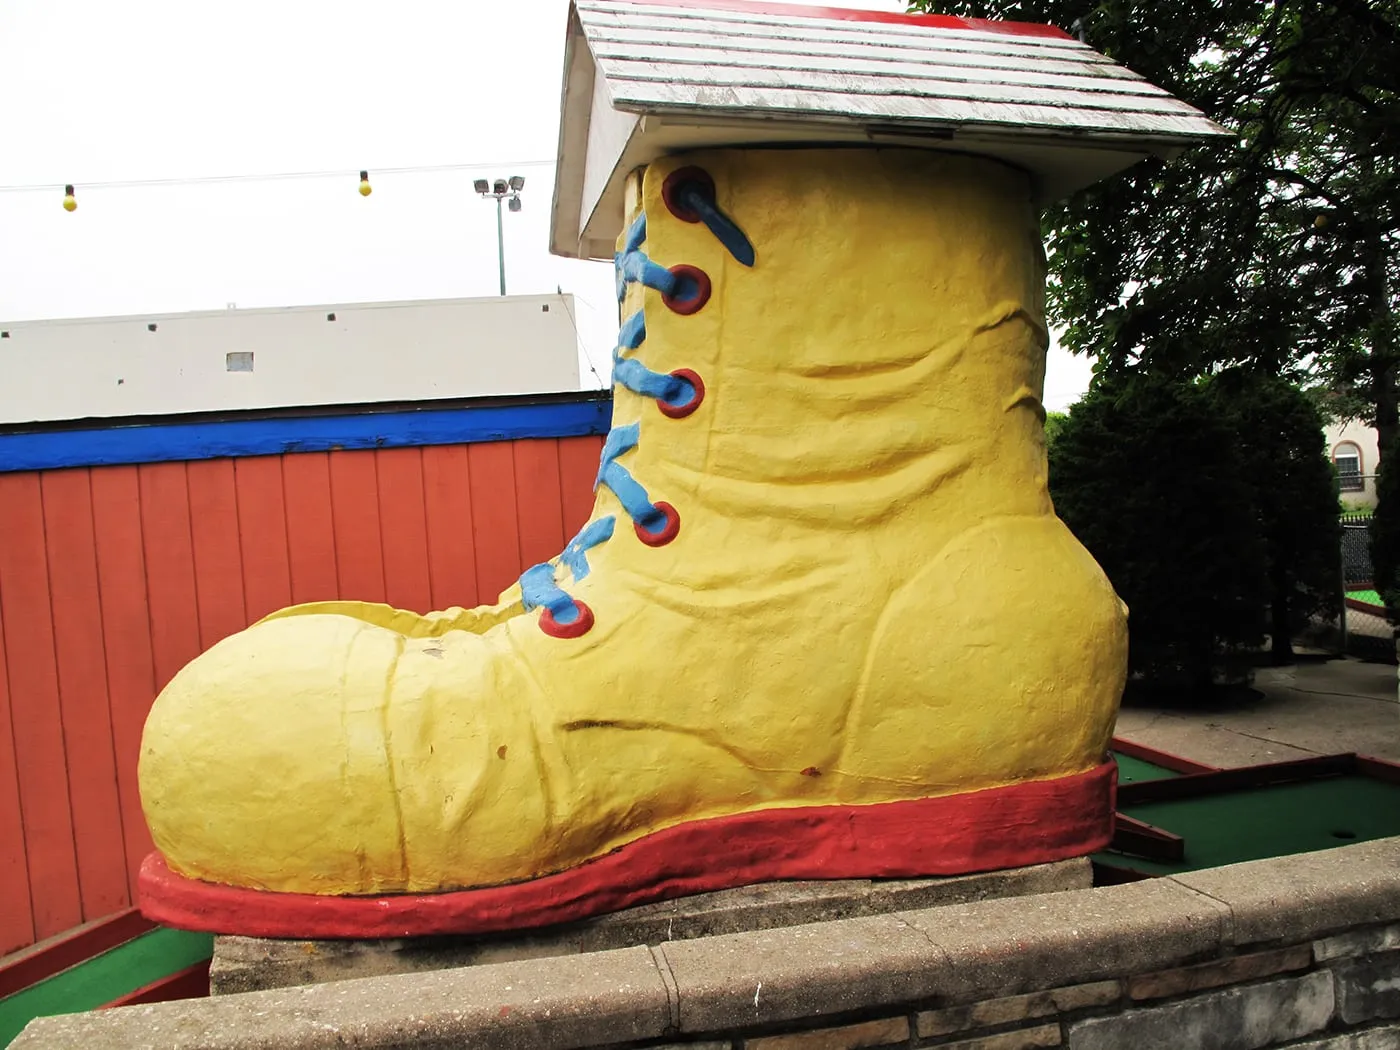 Giant boot at Novelty Golf in Lincolnwood, Illinois.